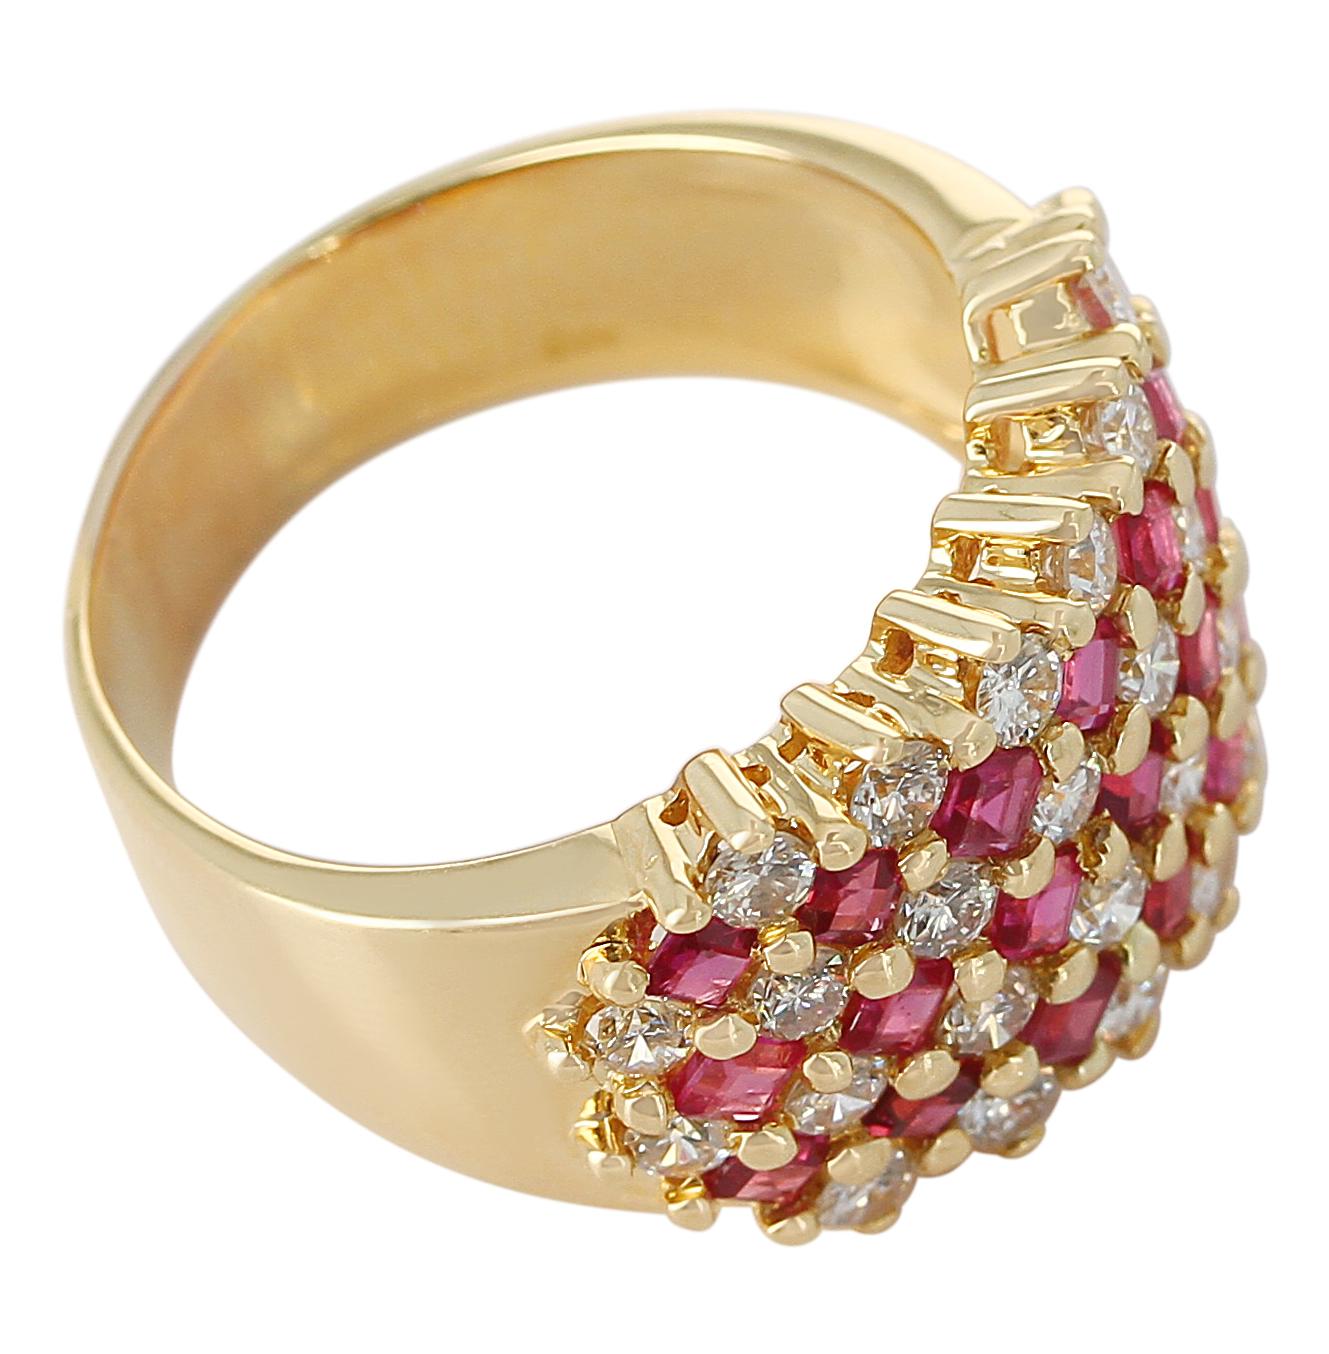 Seven Row-Patterned Ruby and Diamond Ring, 18 Karat Yellow Gold In Excellent Condition For Sale In New York, NY